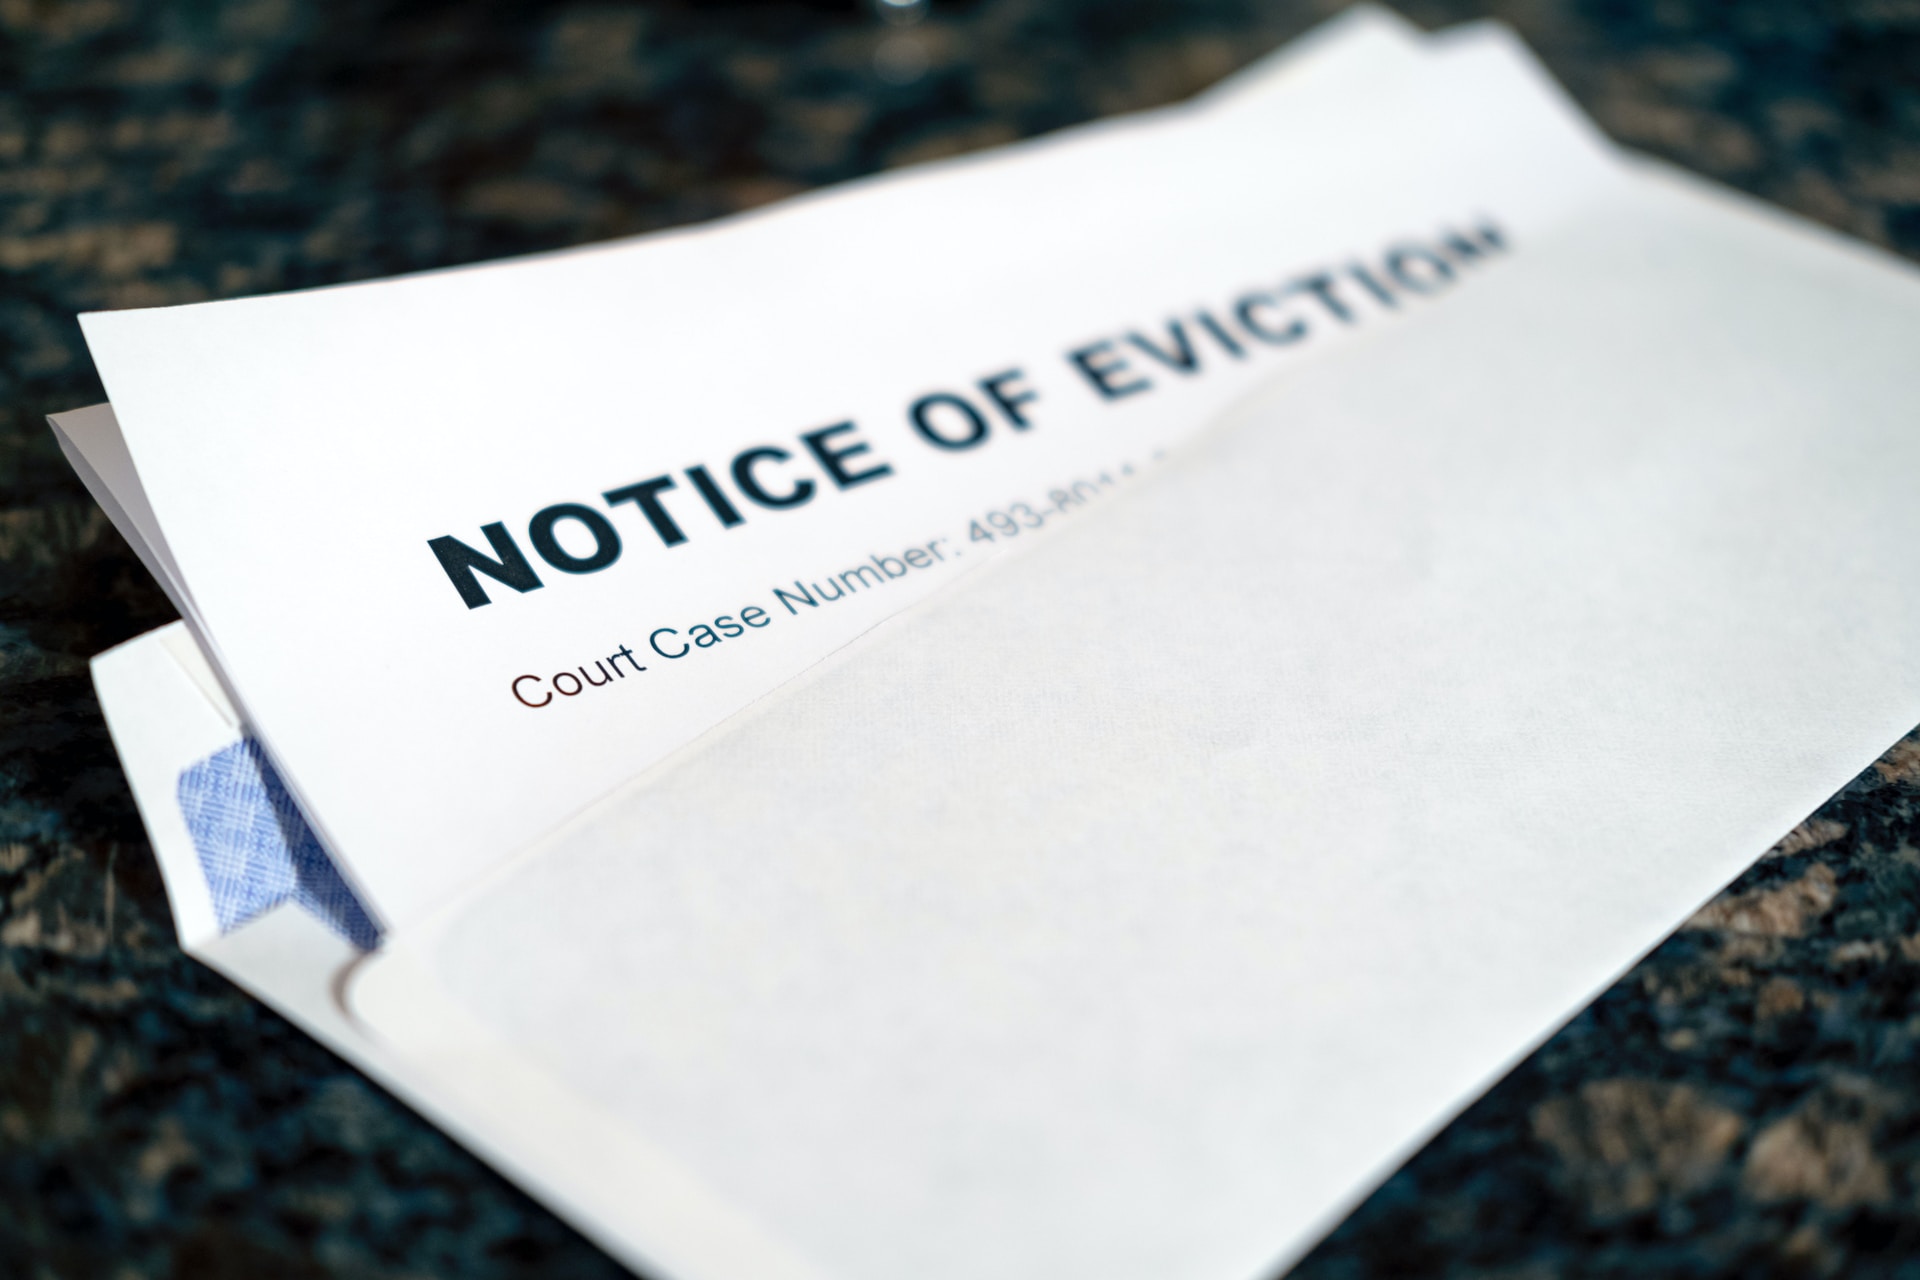 A notice of eviction